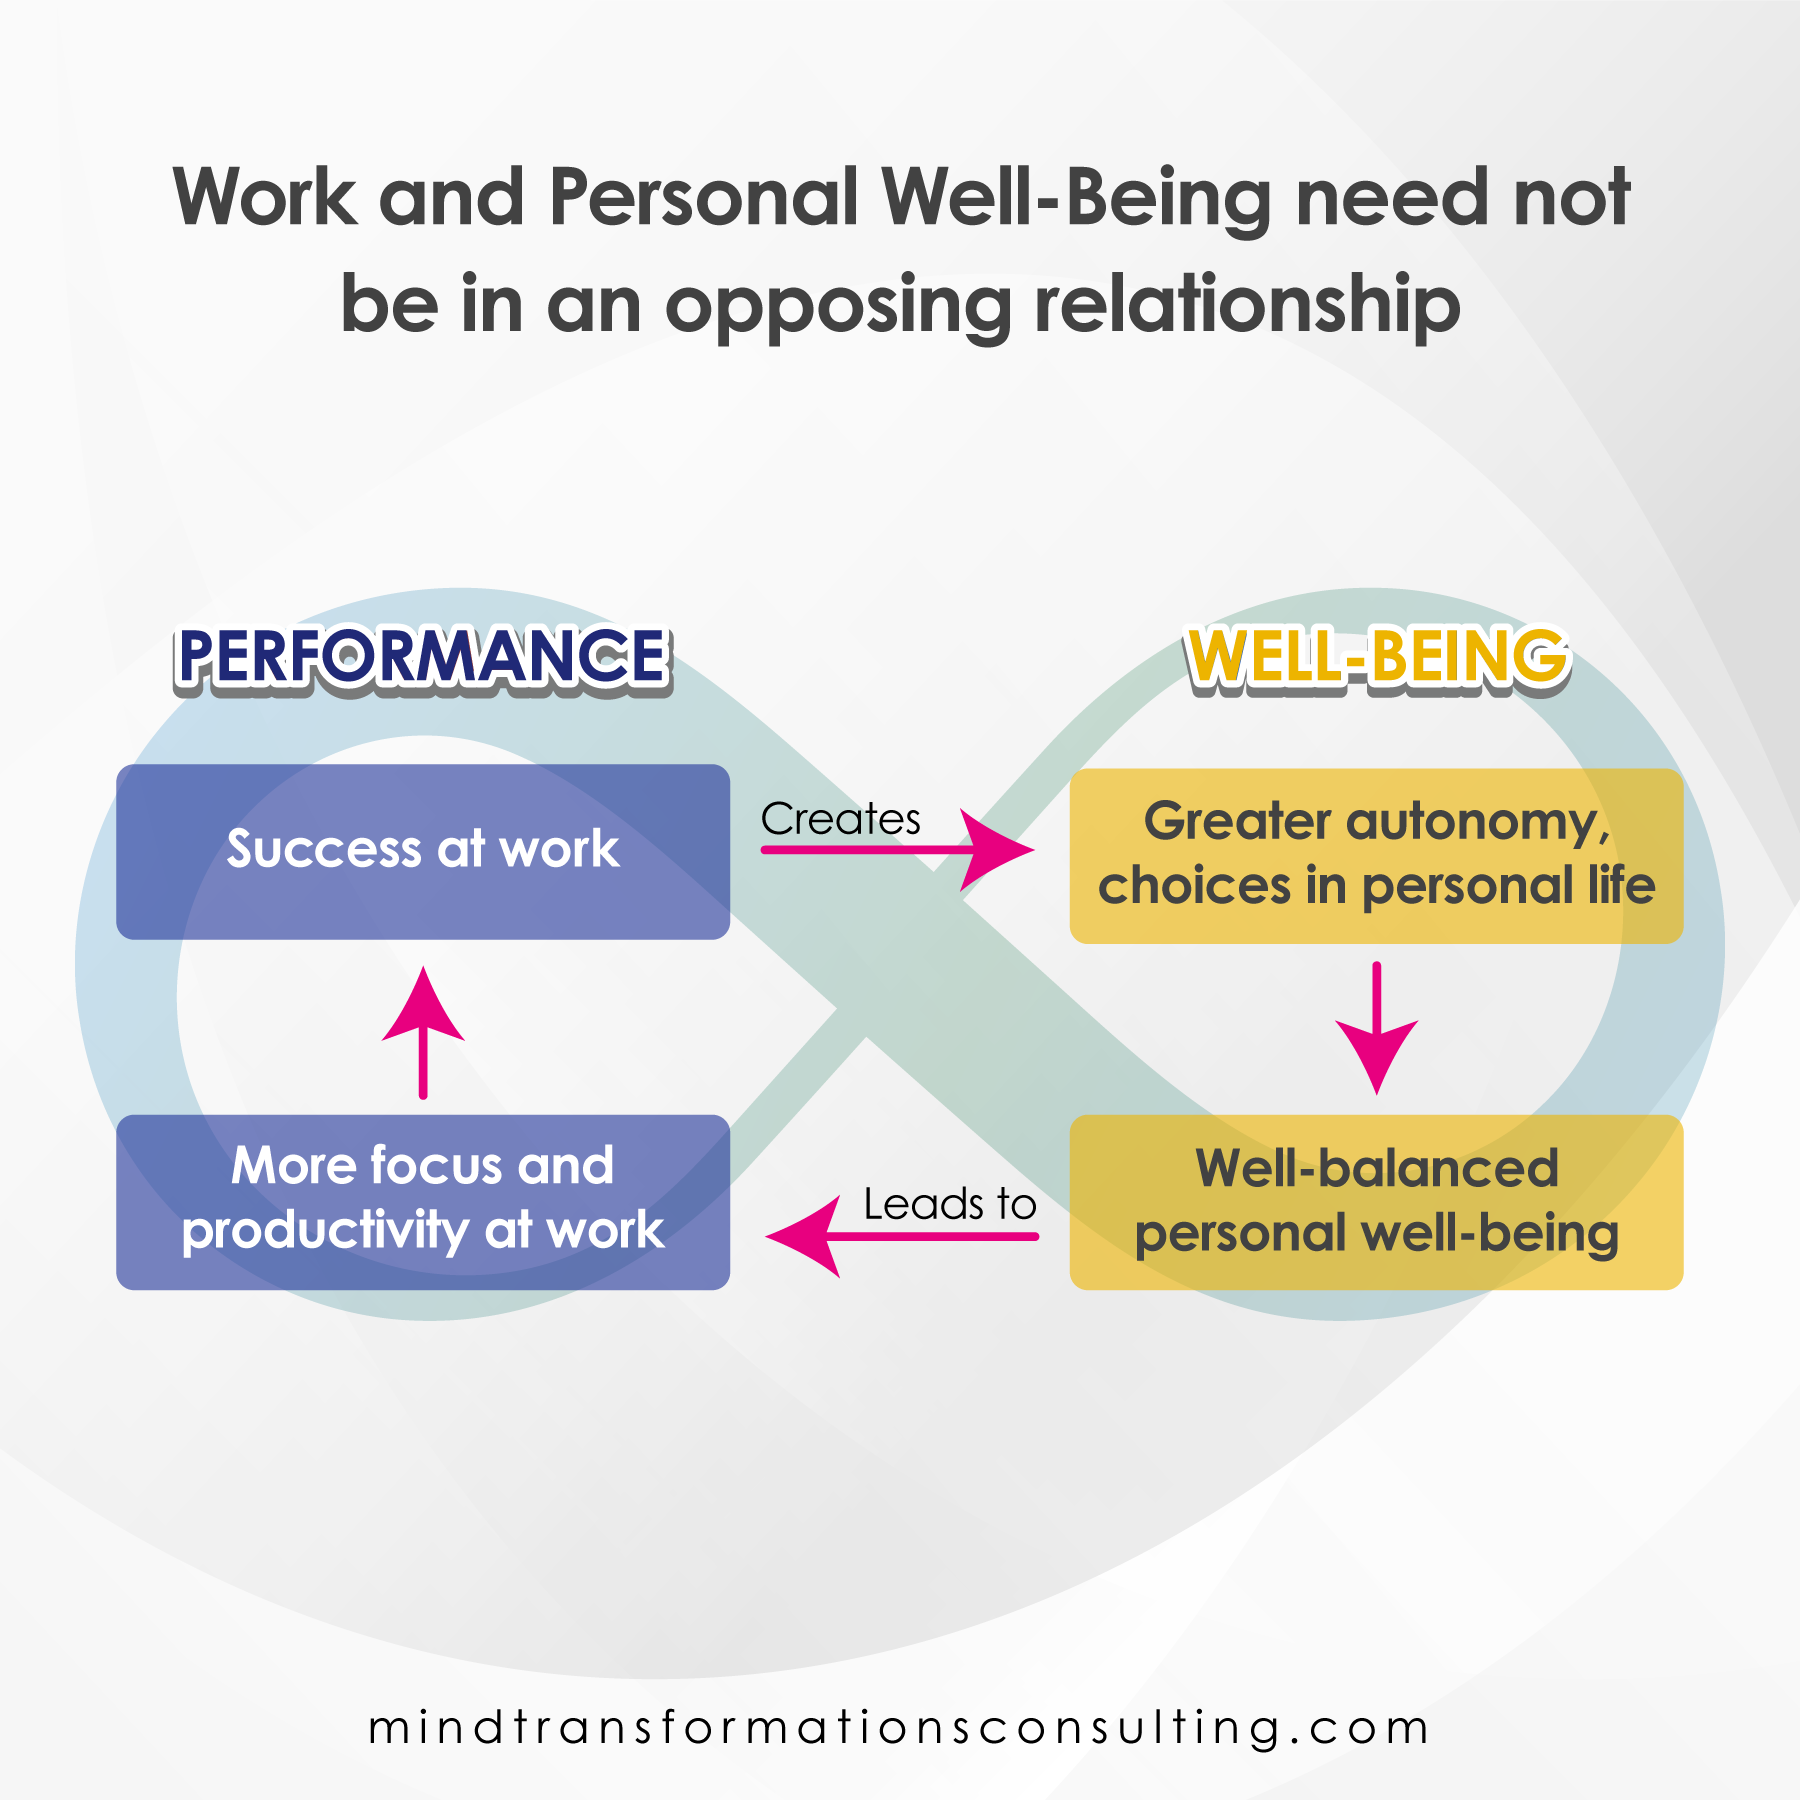 Work & Personal Well-Being need not be in opposing relationship